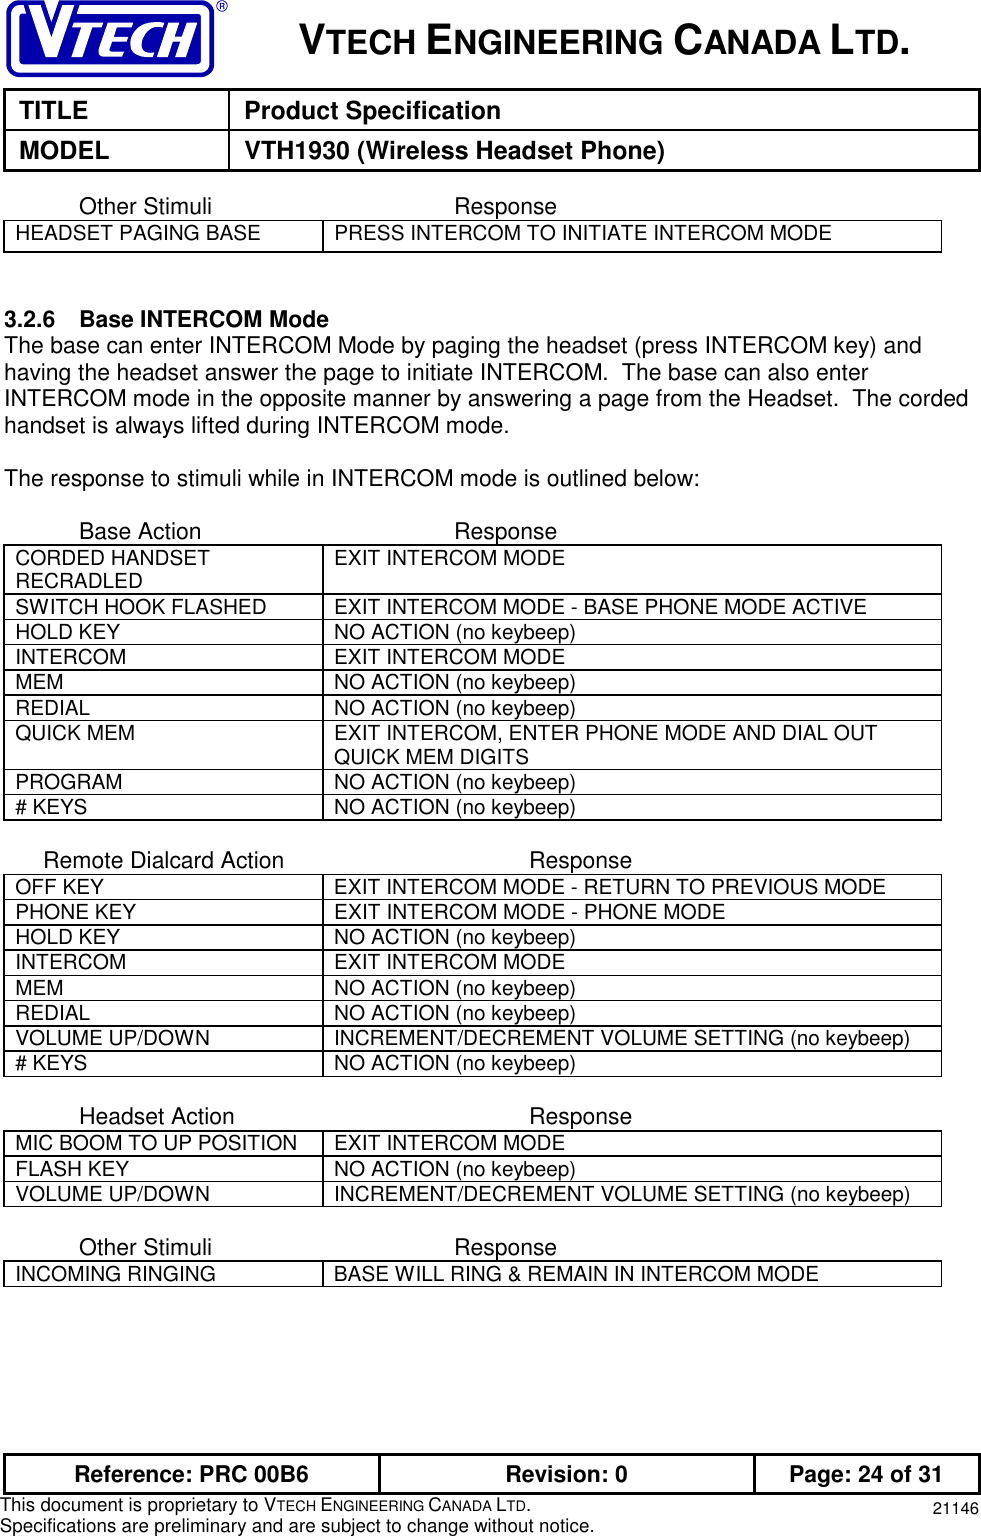 VTECH ENGINEERING CANADA LTD.TITLE Product SpecificationMODEL VTH1930 (Wireless Headset Phone)Reference: PRC 00B6 Revision: 0 Page: 24 of 31This document is proprietary to VTECH ENGINEERING CANADA LTD.Specifications are preliminary and are subject to change without notice. 21146Other Stimuli ResponseHEADSET PAGING BASE PRESS INTERCOM TO INITIATE INTERCOM MODE3.2.6 Base INTERCOM ModeThe base can enter INTERCOM Mode by paging the headset (press INTERCOM key) andhaving the headset answer the page to initiate INTERCOM.  The base can also enterINTERCOM mode in the opposite manner by answering a page from the Headset.  The cordedhandset is always lifted during INTERCOM mode.The response to stimuli while in INTERCOM mode is outlined below:Base Action ResponseCORDED HANDSETRECRADLED EXIT INTERCOM MODESWITCH HOOK FLASHED EXIT INTERCOM MODE - BASE PHONE MODE ACTIVEHOLD KEY NO ACTION (no keybeep)INTERCOM EXIT INTERCOM MODEMEM NO ACTION (no keybeep)REDIAL NO ACTION (no keybeep)QUICK MEM EXIT INTERCOM, ENTER PHONE MODE AND DIAL OUTQUICK MEM DIGITSPROGRAM NO ACTION (no keybeep)# KEYS NO ACTION (no keybeep)      Remote Dialcard Action ResponseOFF KEY EXIT INTERCOM MODE - RETURN TO PREVIOUS MODEPHONE KEY EXIT INTERCOM MODE - PHONE MODEHOLD KEY NO ACTION (no keybeep)INTERCOM EXIT INTERCOM MODEMEM NO ACTION (no keybeep)REDIAL NO ACTION (no keybeep)VOLUME UP/DOWN INCREMENT/DECREMENT VOLUME SETTING (no keybeep)# KEYS NO ACTION (no keybeep)Headset Action ResponseMIC BOOM TO UP POSITION EXIT INTERCOM MODEFLASH KEY NO ACTION (no keybeep)VOLUME UP/DOWN INCREMENT/DECREMENT VOLUME SETTING (no keybeep)Other Stimuli ResponseINCOMING RINGING BASE WILL RING &amp; REMAIN IN INTERCOM MODE